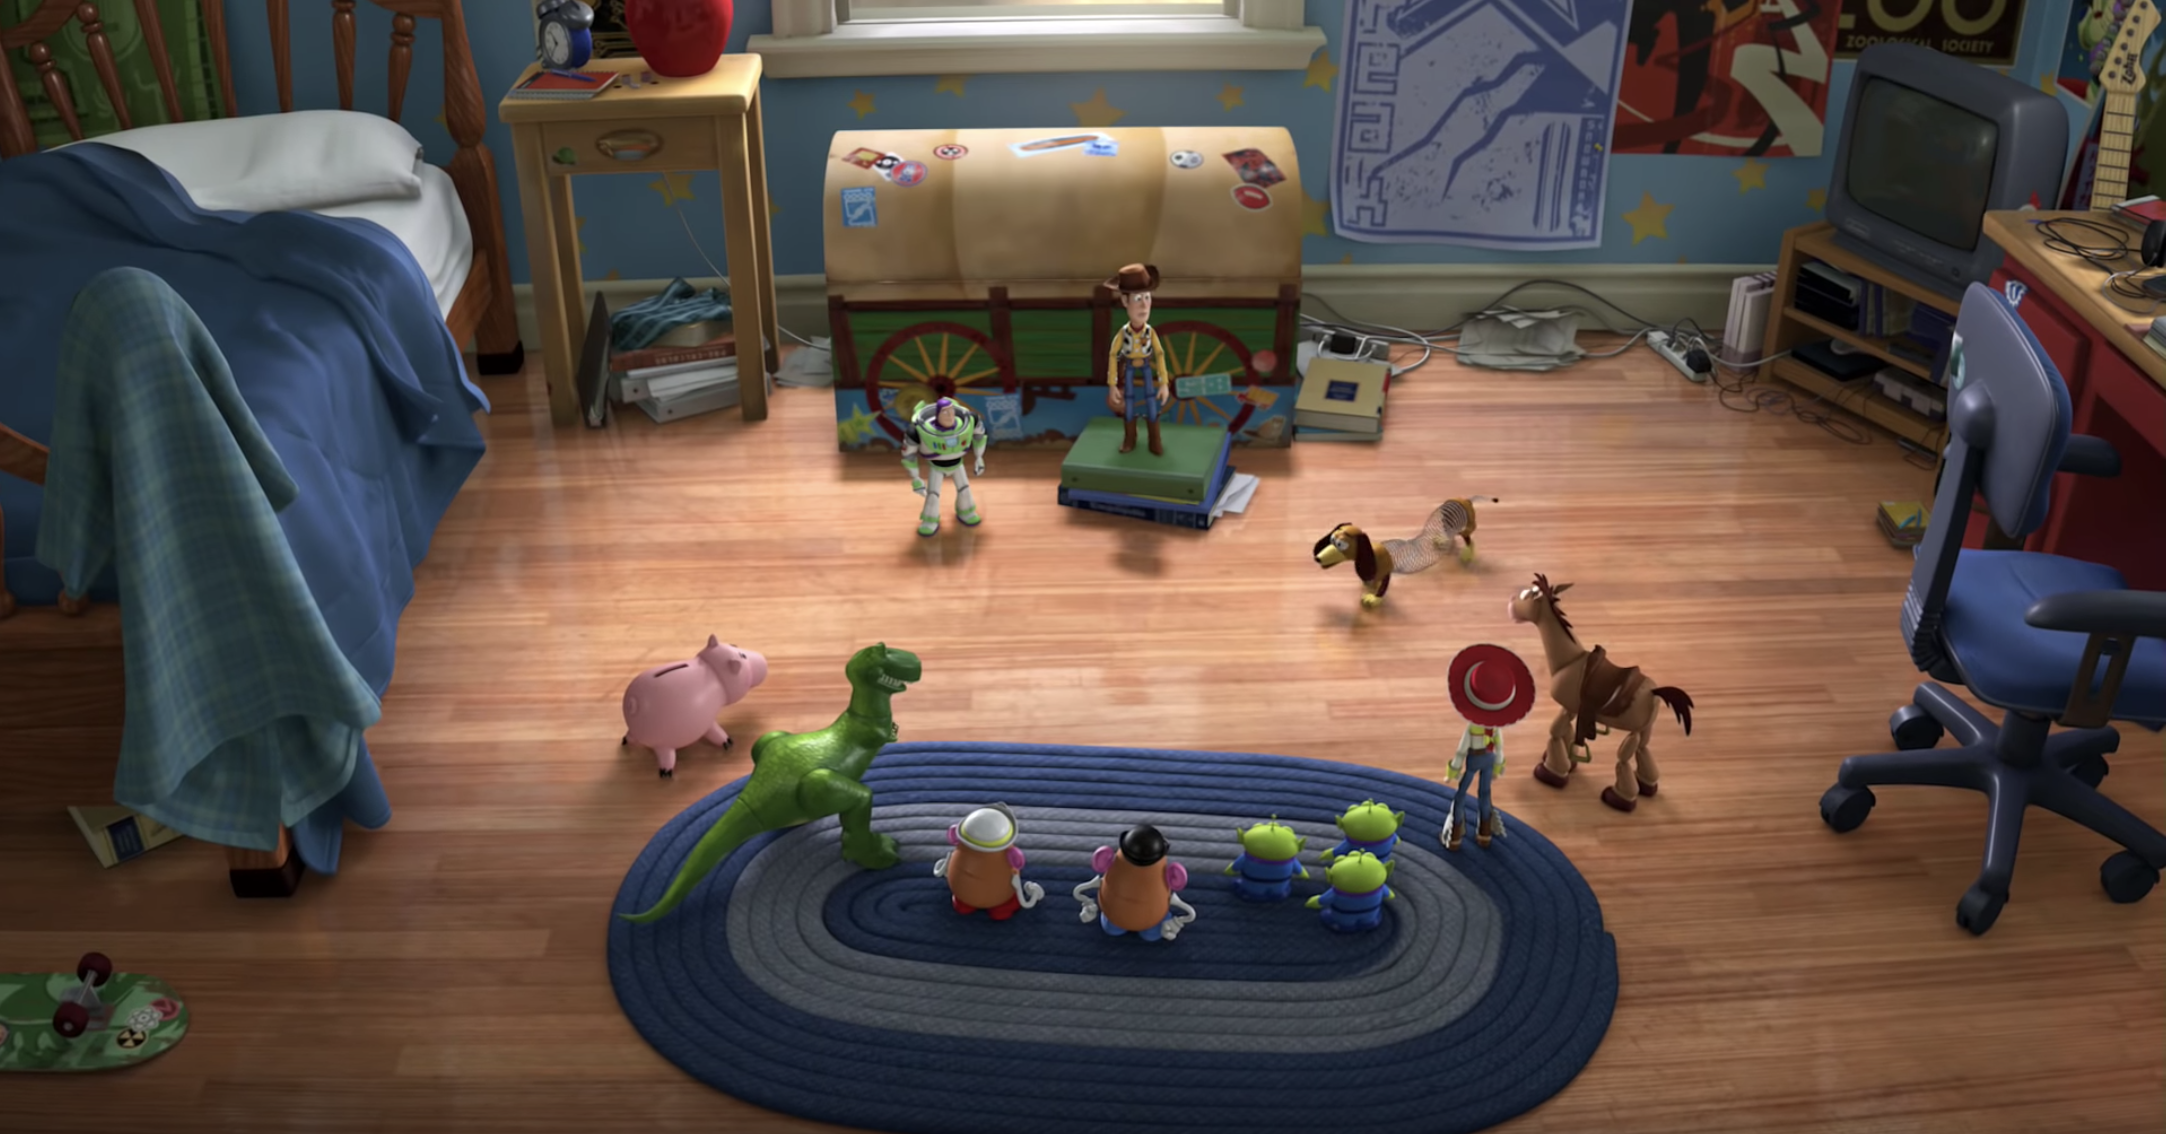 Toy Story characters gather around on bedroom floor